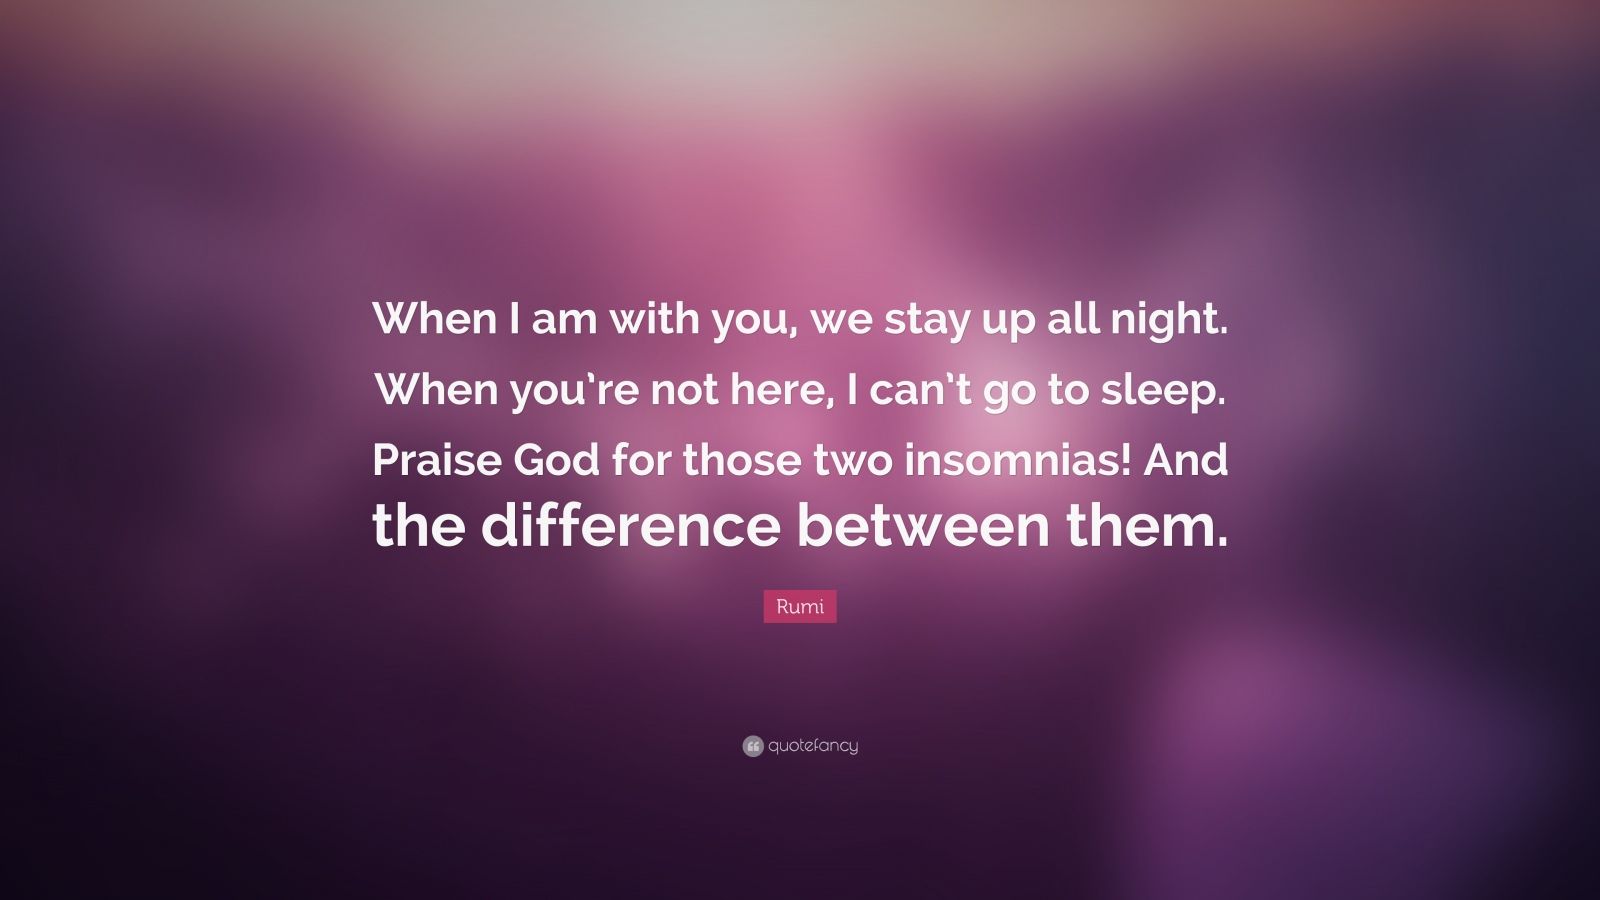 Rumi Quote: "When I am with you, we stay up all night. When you're not here, I can't go to sleep ...